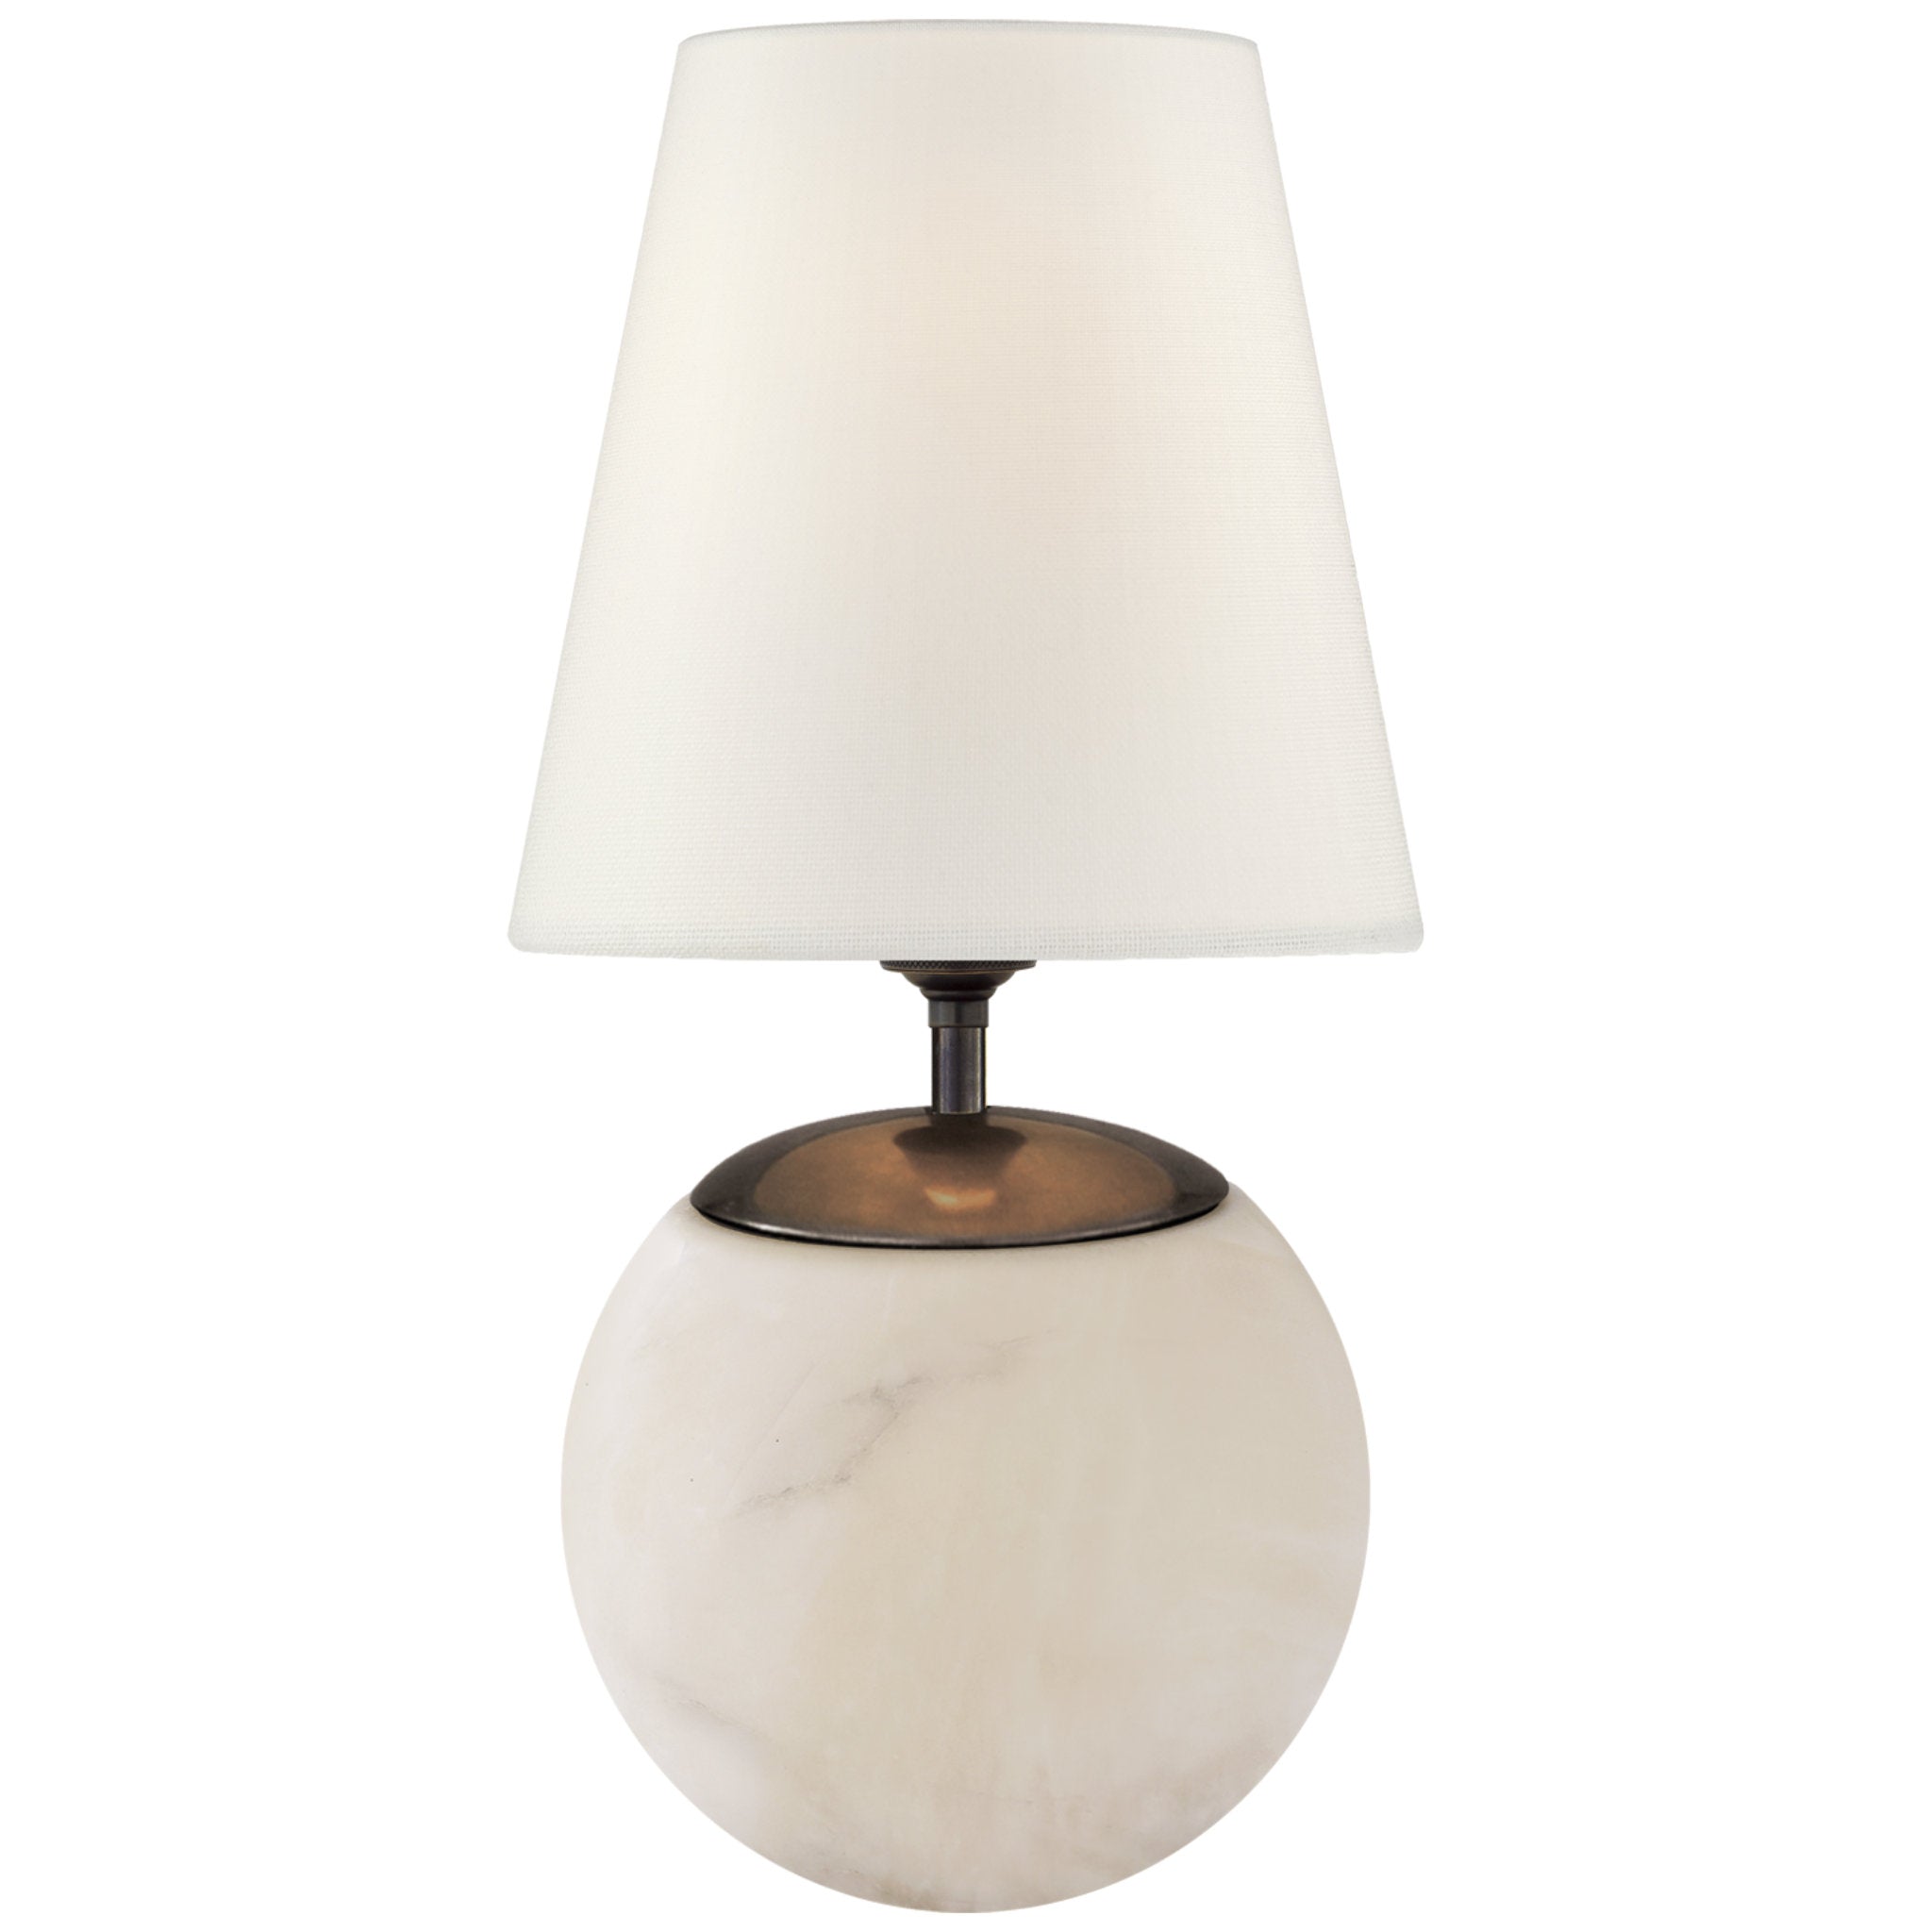 Thomas O'Brien Terri Large Round Table Lamp in Alabaster with Linen Shade